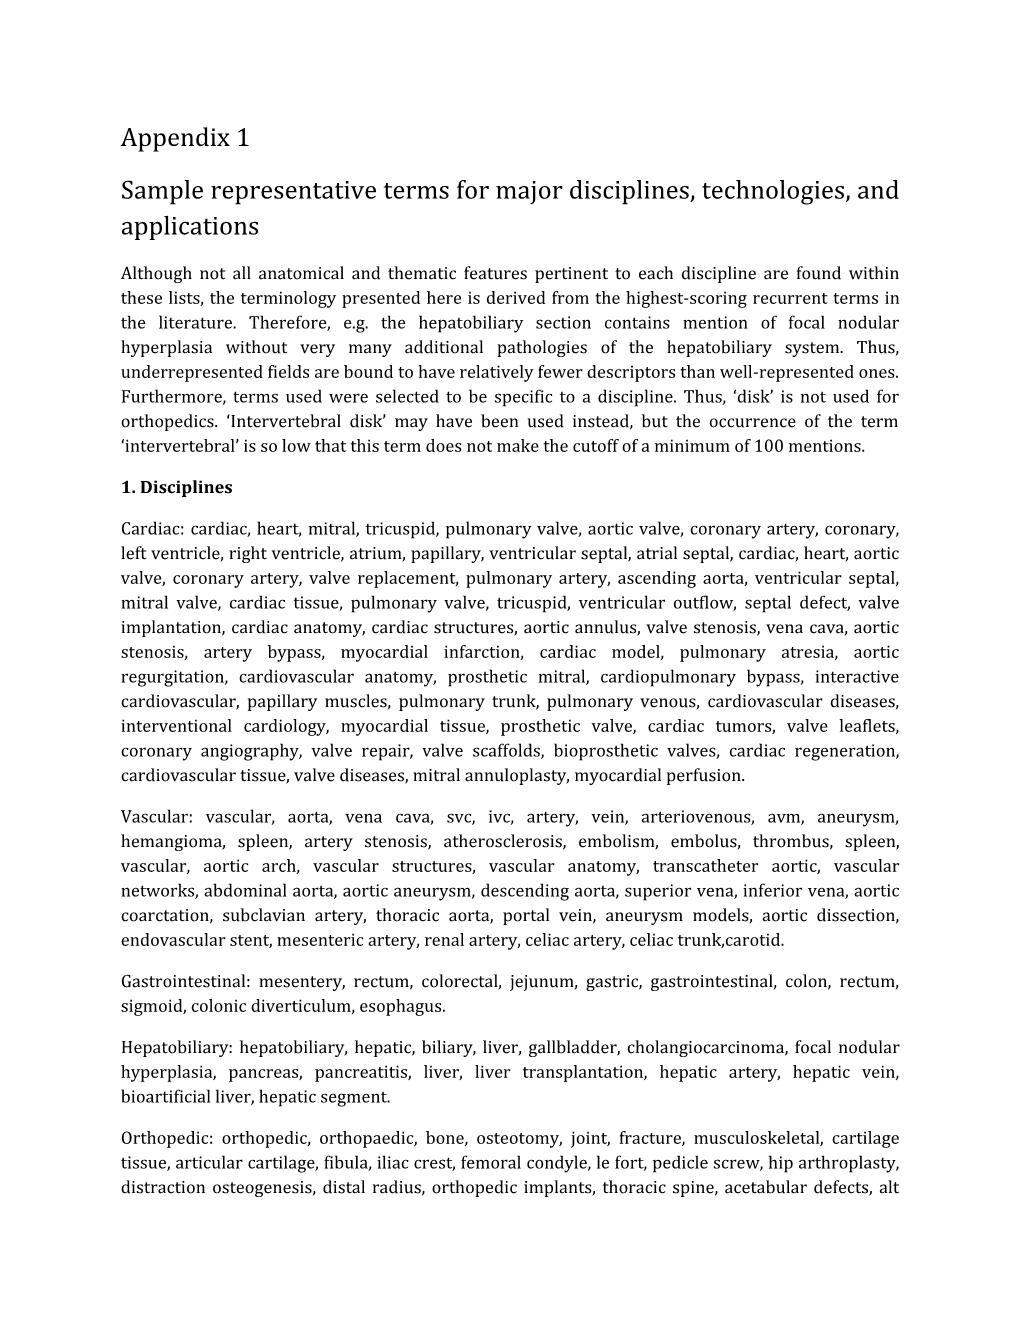 Sample Representative Terms for Major Disciplines, Technologies, and Applications